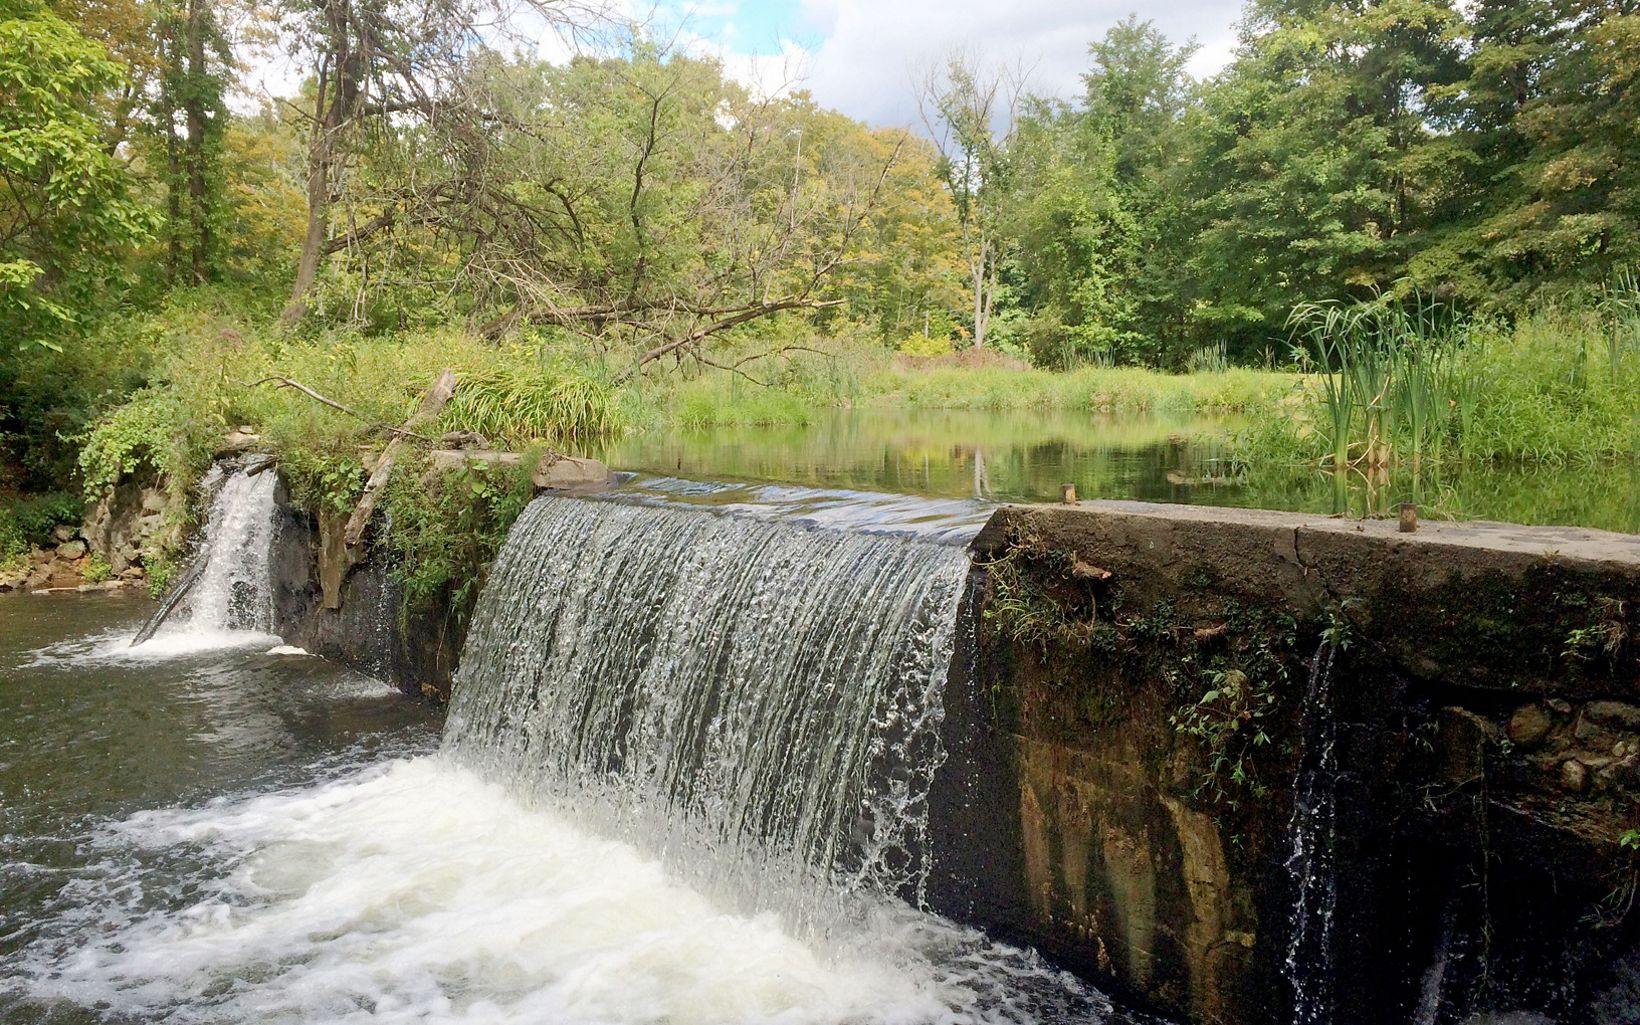 Obsolete dams, like the Old Papermill Dam in Connecticut, can often cause harm to the environment.